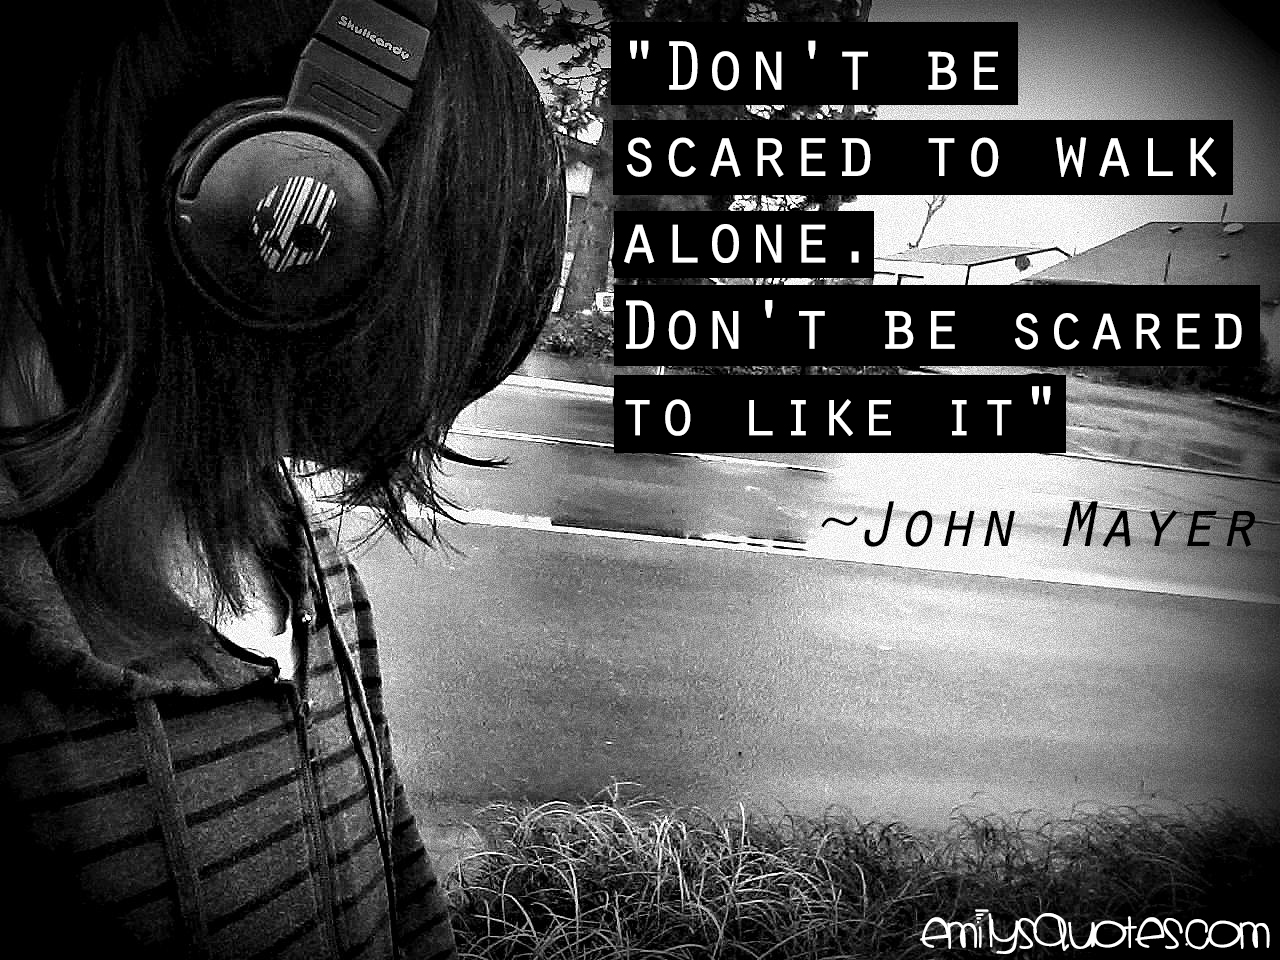 Don’t be scared to walk alone. Don’t be scared to like it